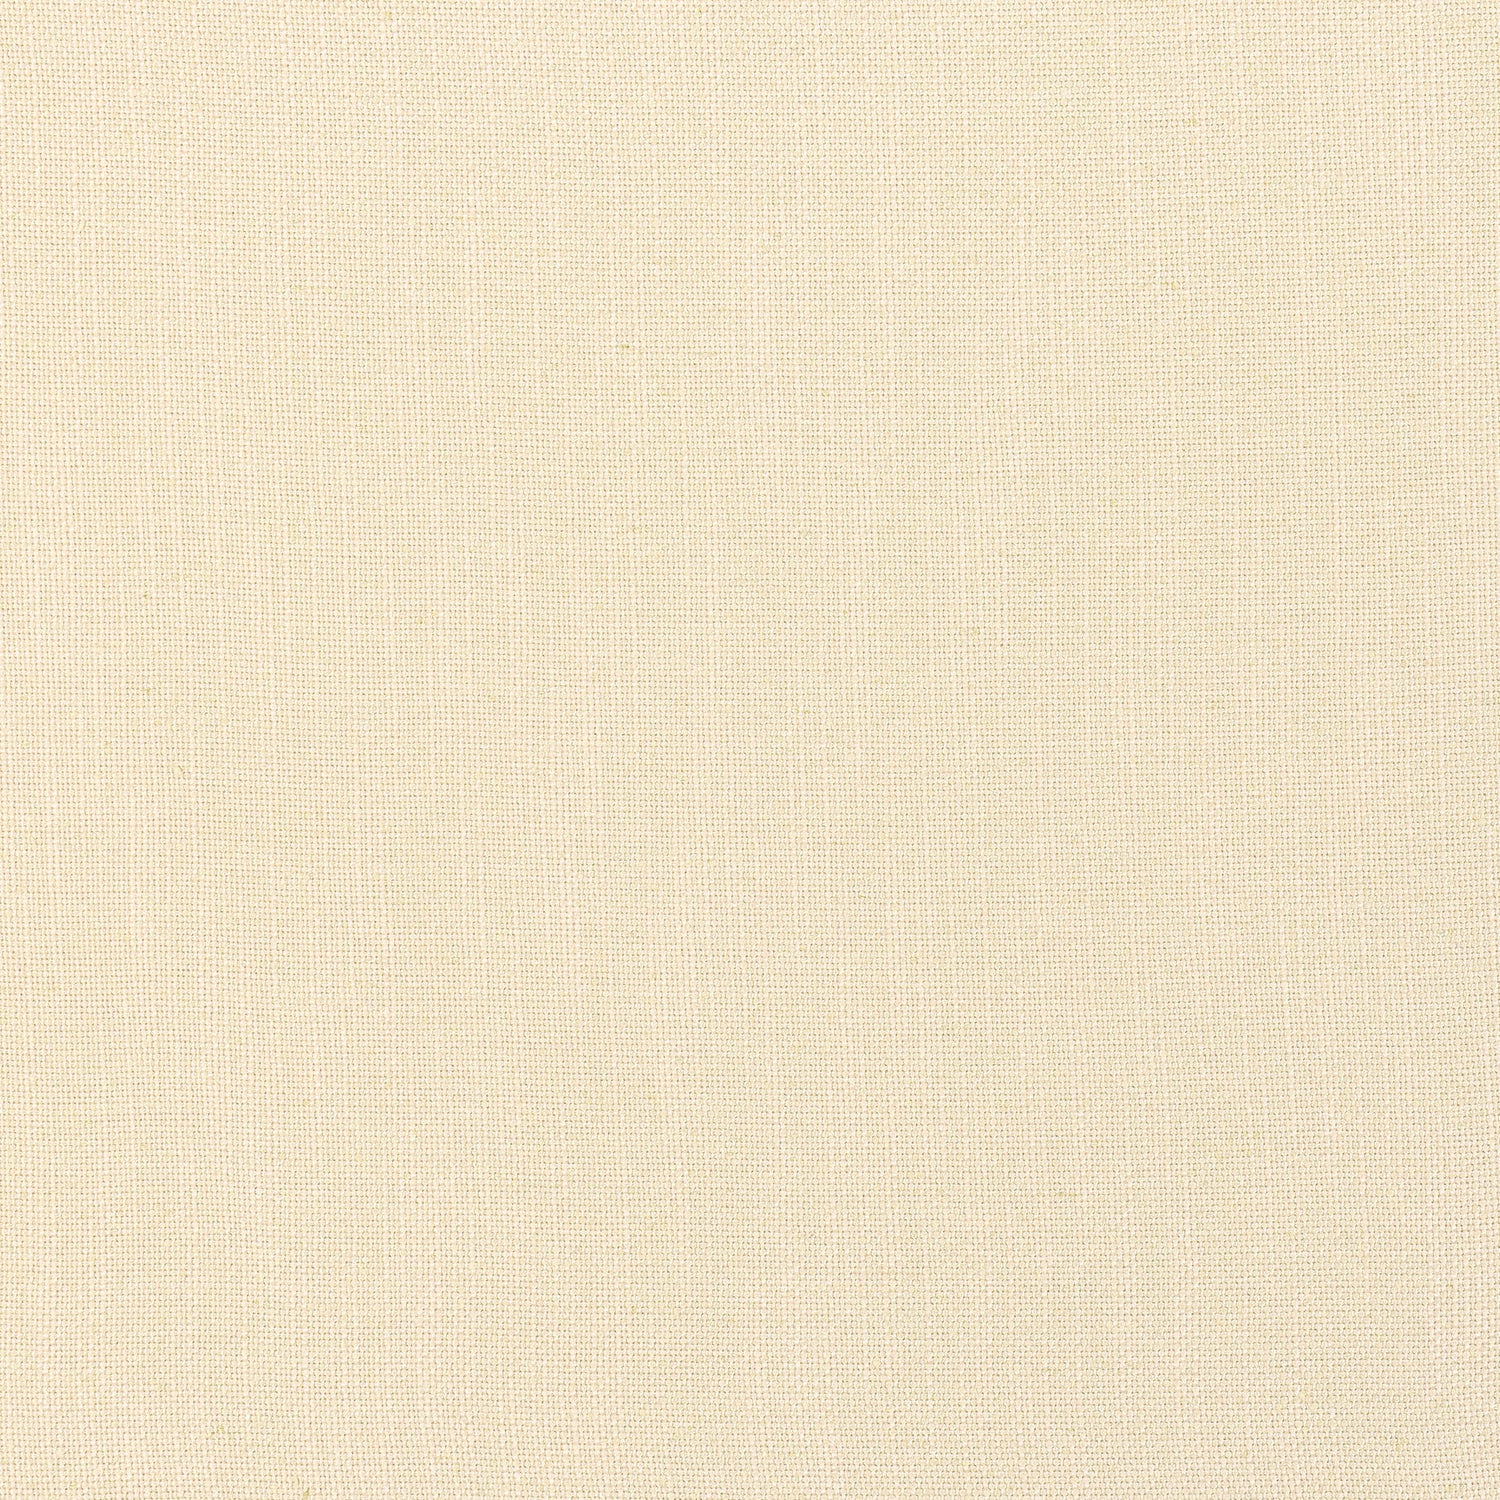 Palisade Linen fabric in almond color - pattern number FWW7631 - by Thibaut in the Palisades collection